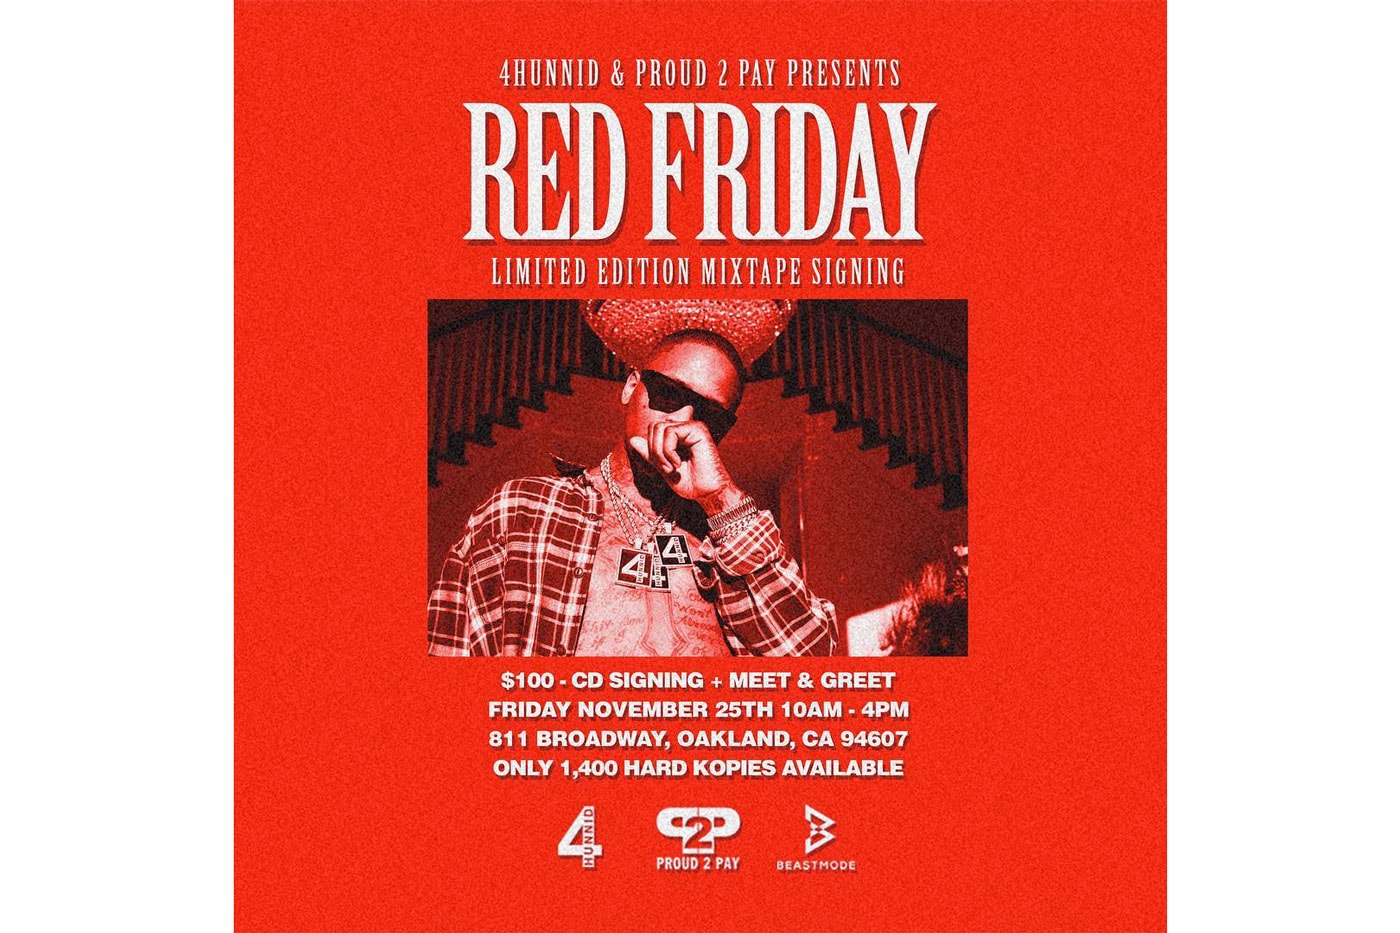 YG’s 'Red Friday' Mixtape CD Will Cost $100 Oakland Meet and Greet